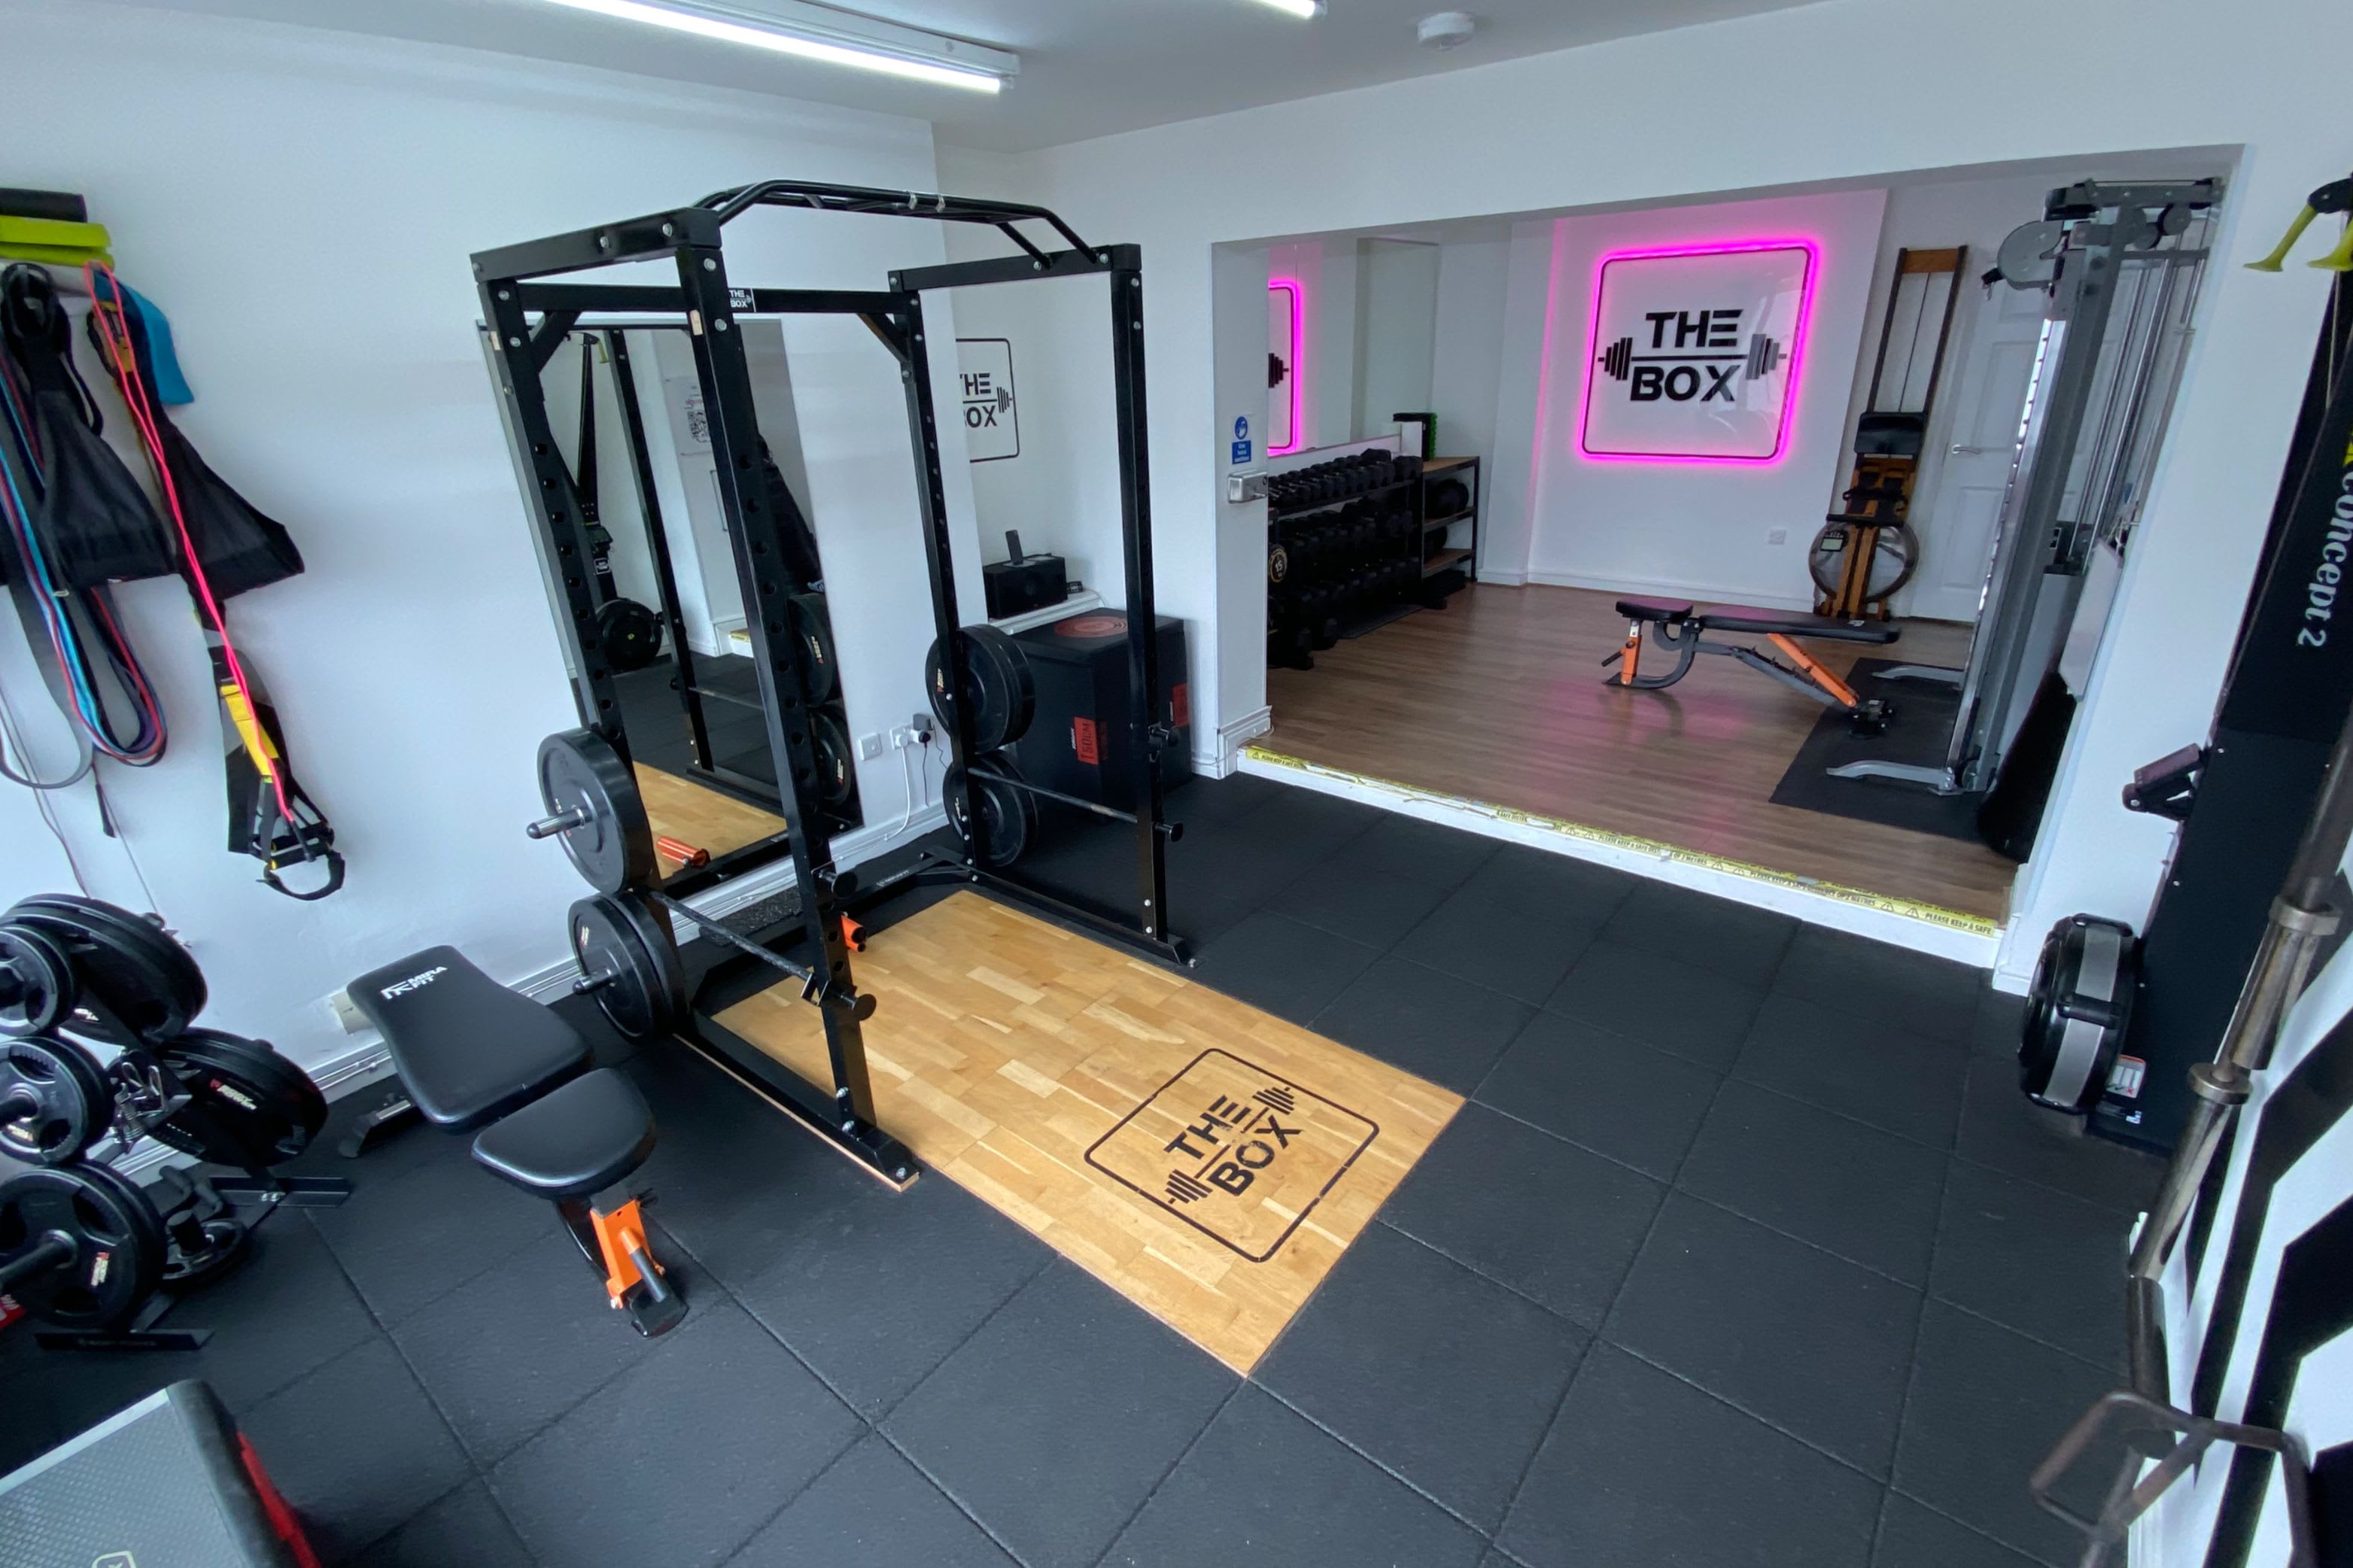 The Box Personal Training Studio: Read Reviews and Book Classes on ClassPass